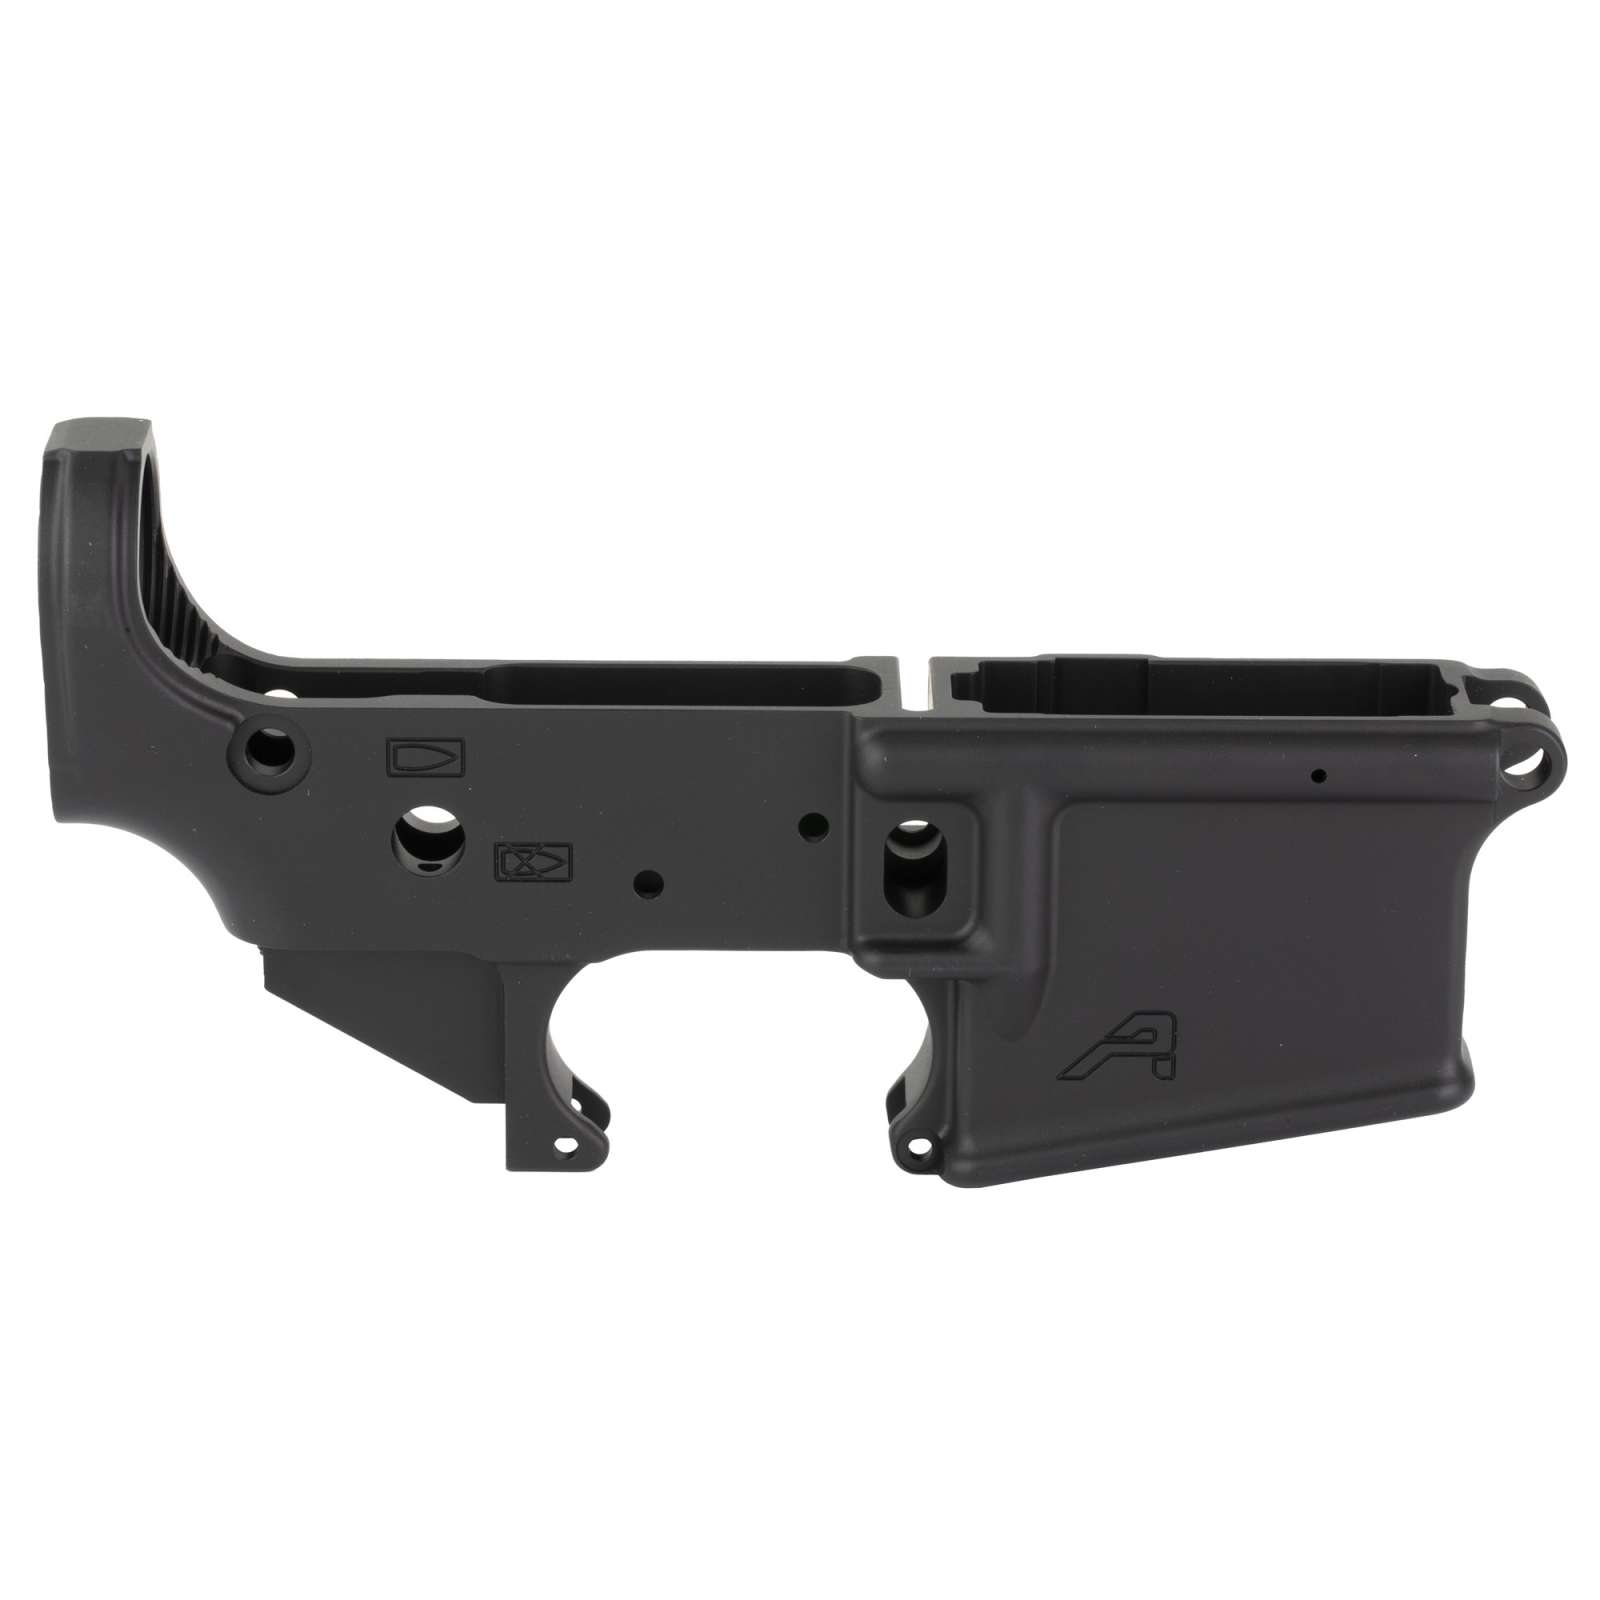 AR 15 STRIPPED LOWER RECEIVERS